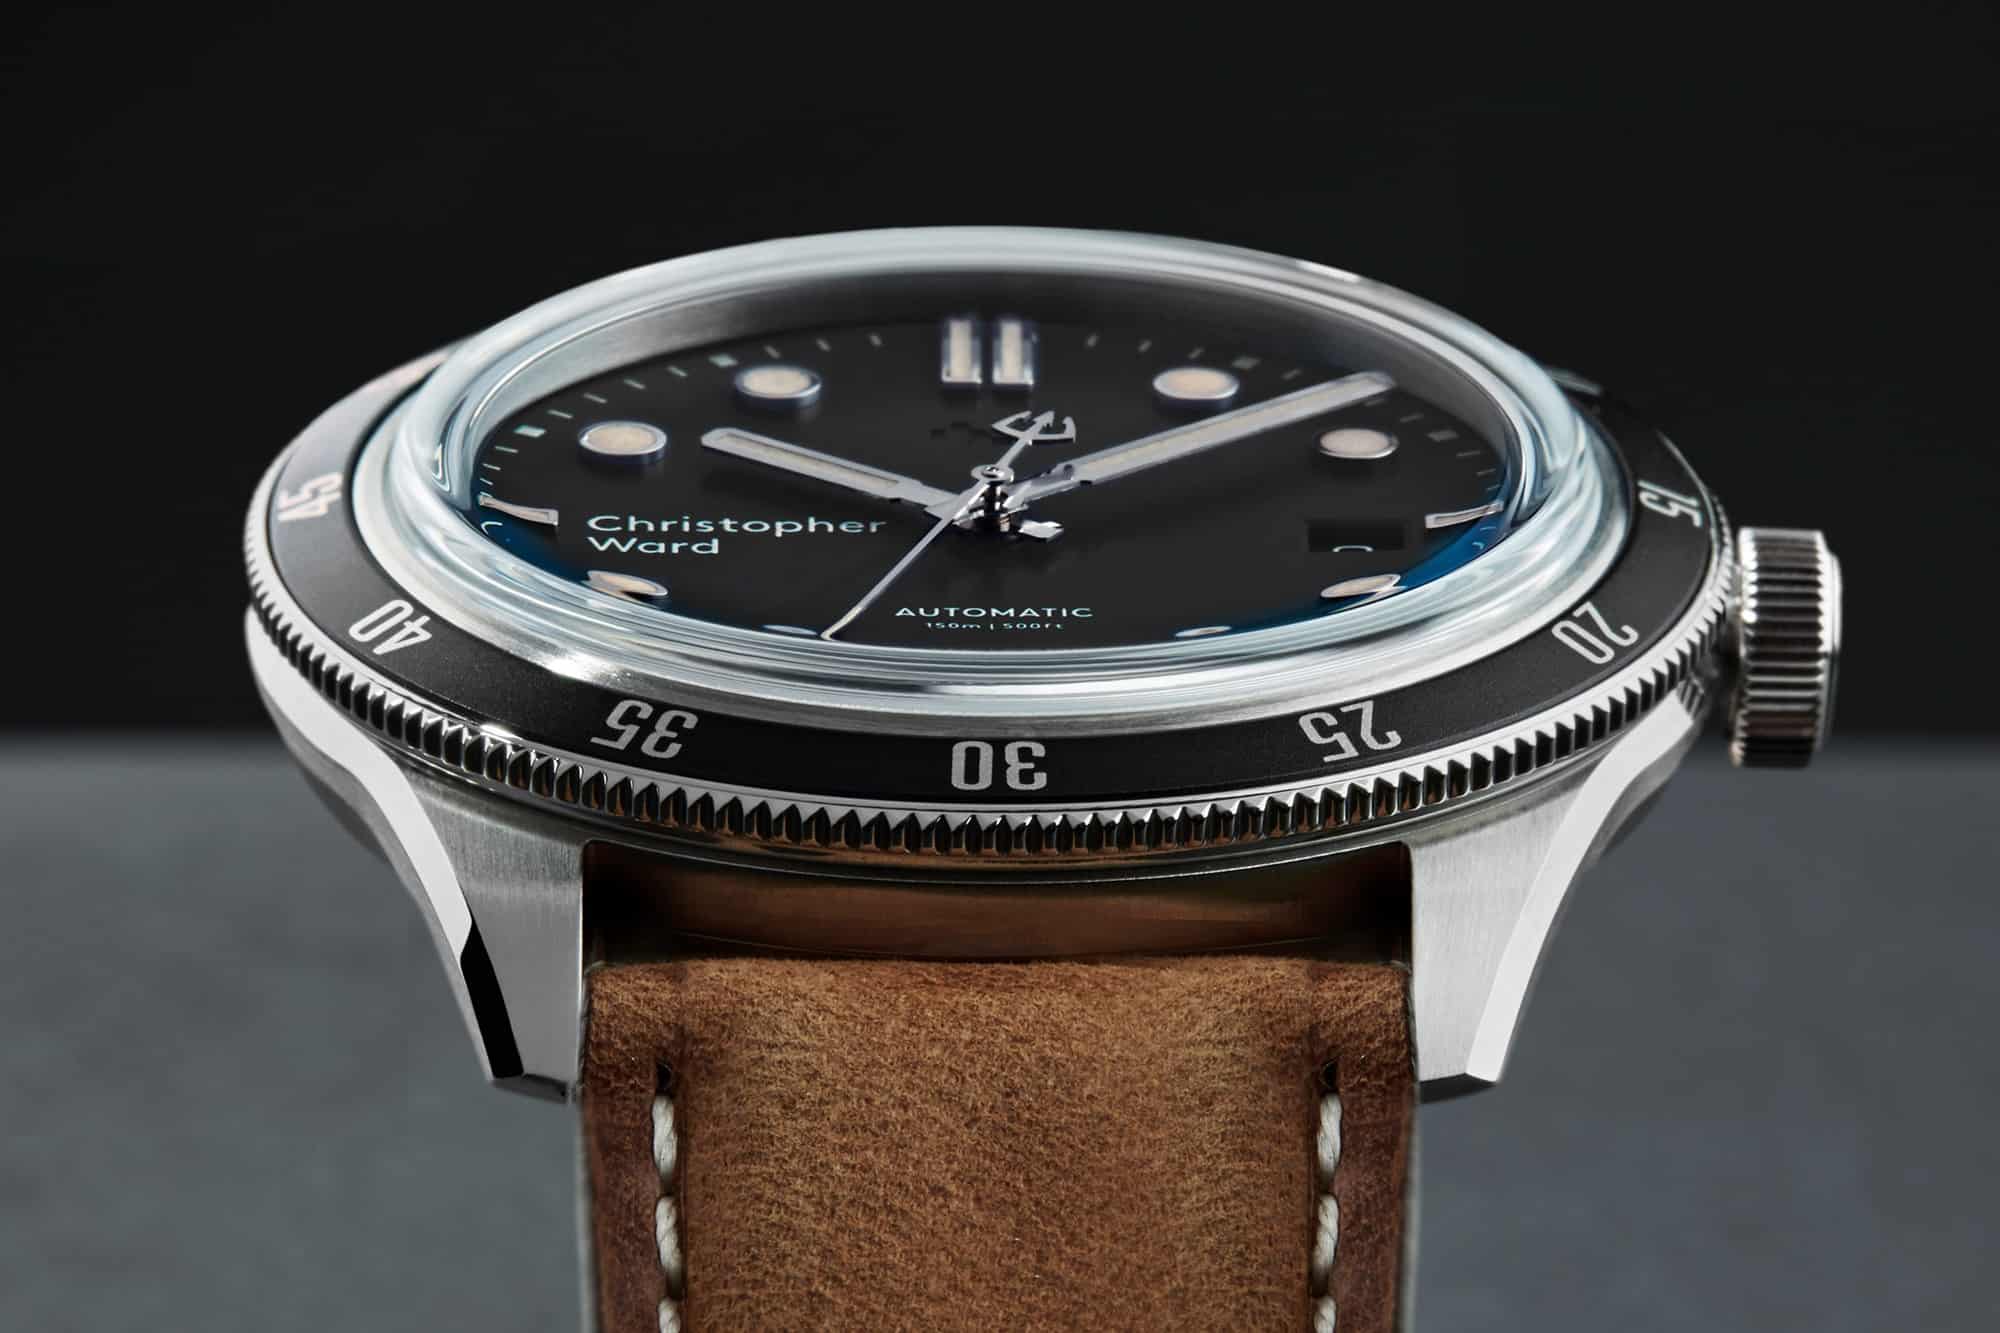 Christopher Ward's new C65 Automatic Christopher-Ward-C65-Trident-Automatic-PR-4